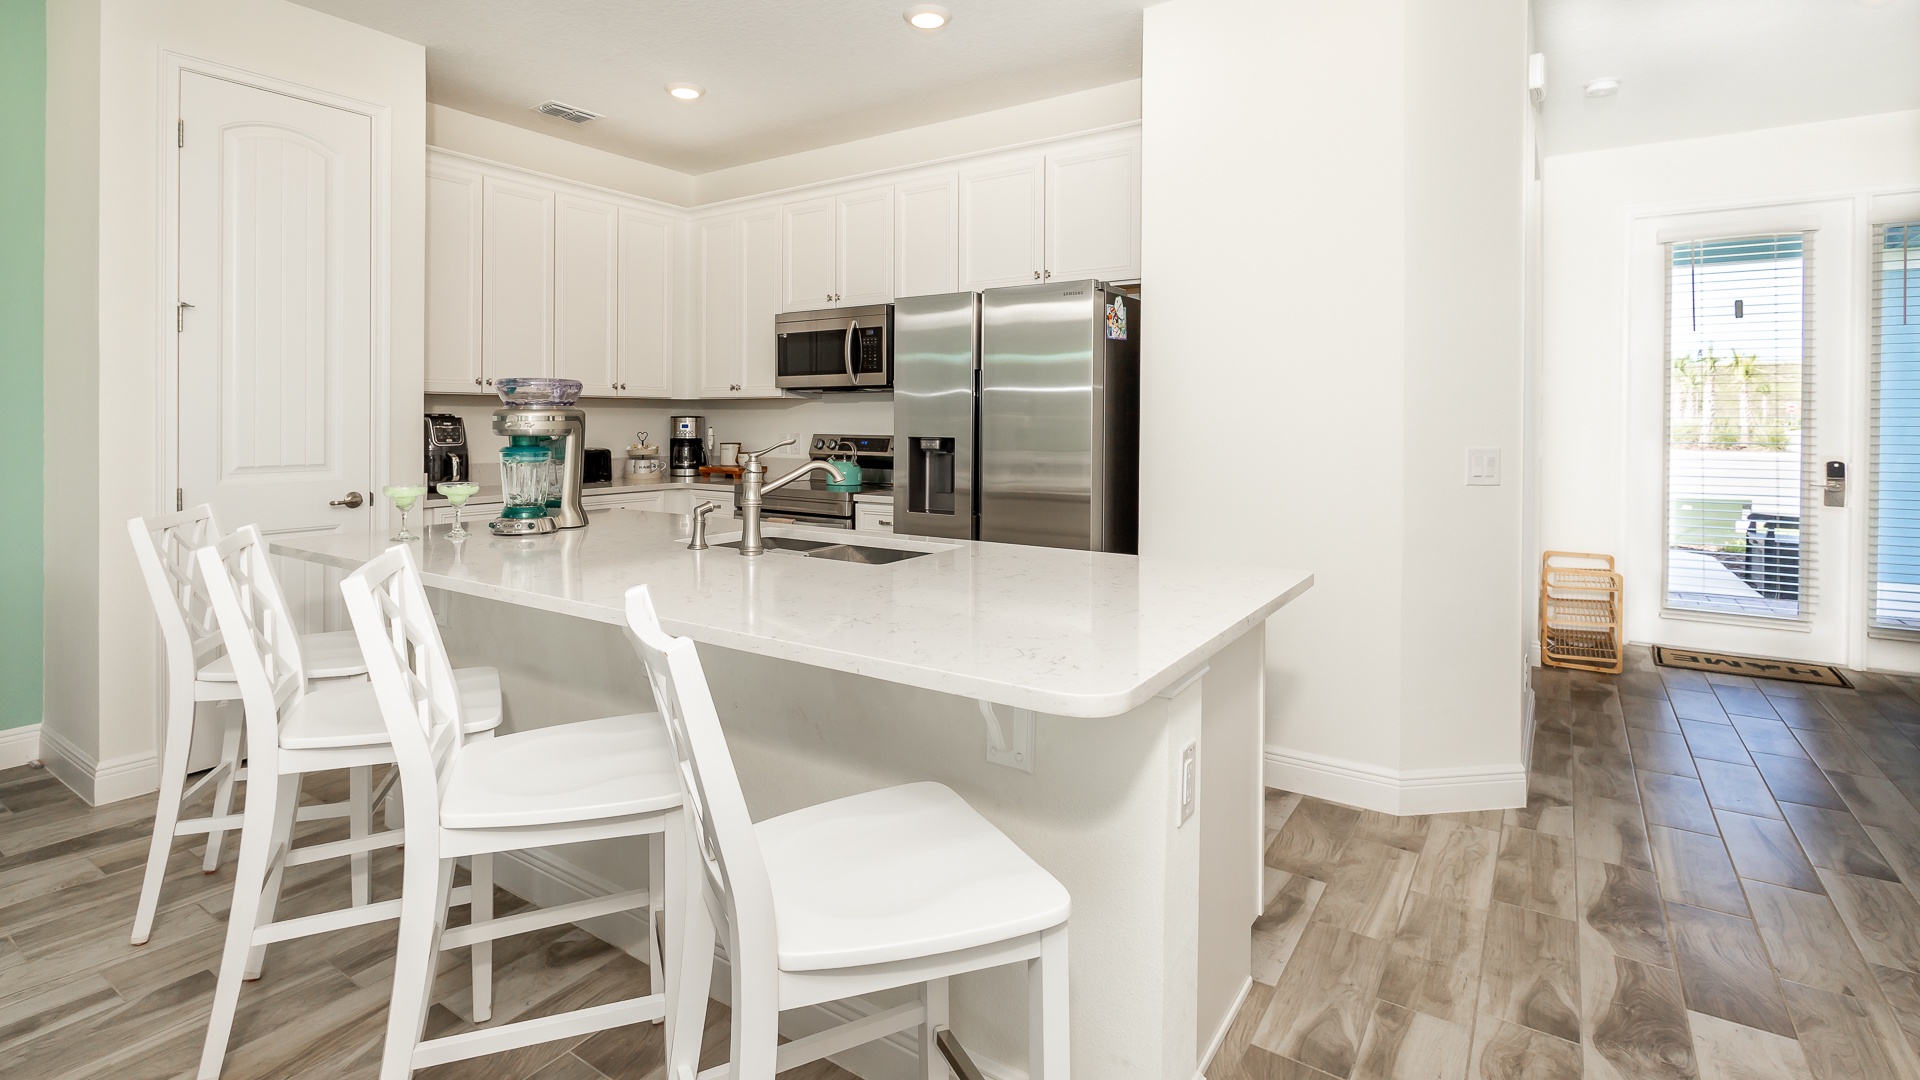 Sip morning coffee or enjoy a snack at the kitchen counter, with seating for 4